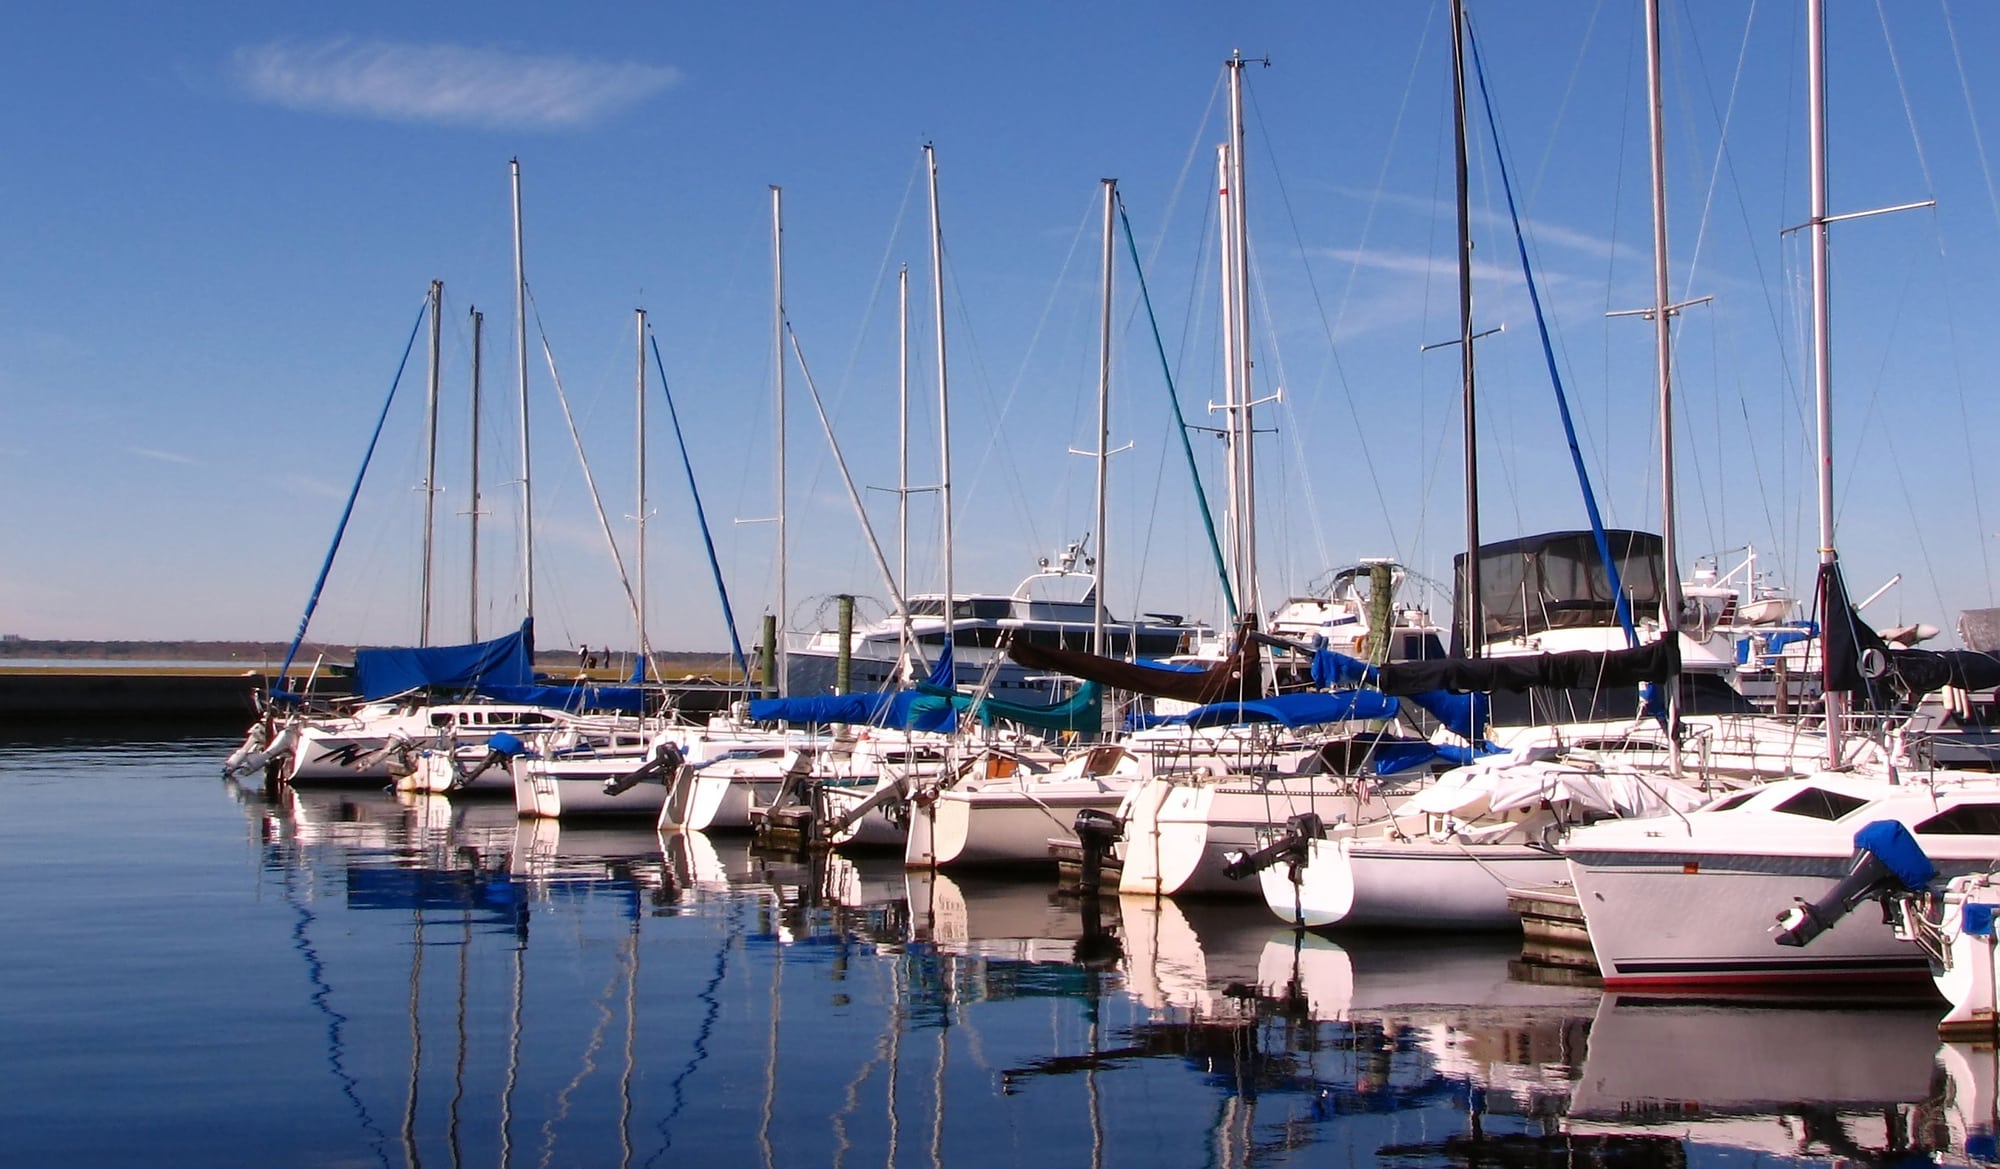 Boating Businesses See Surge In Sales, Challenged To Keep Up With Demand